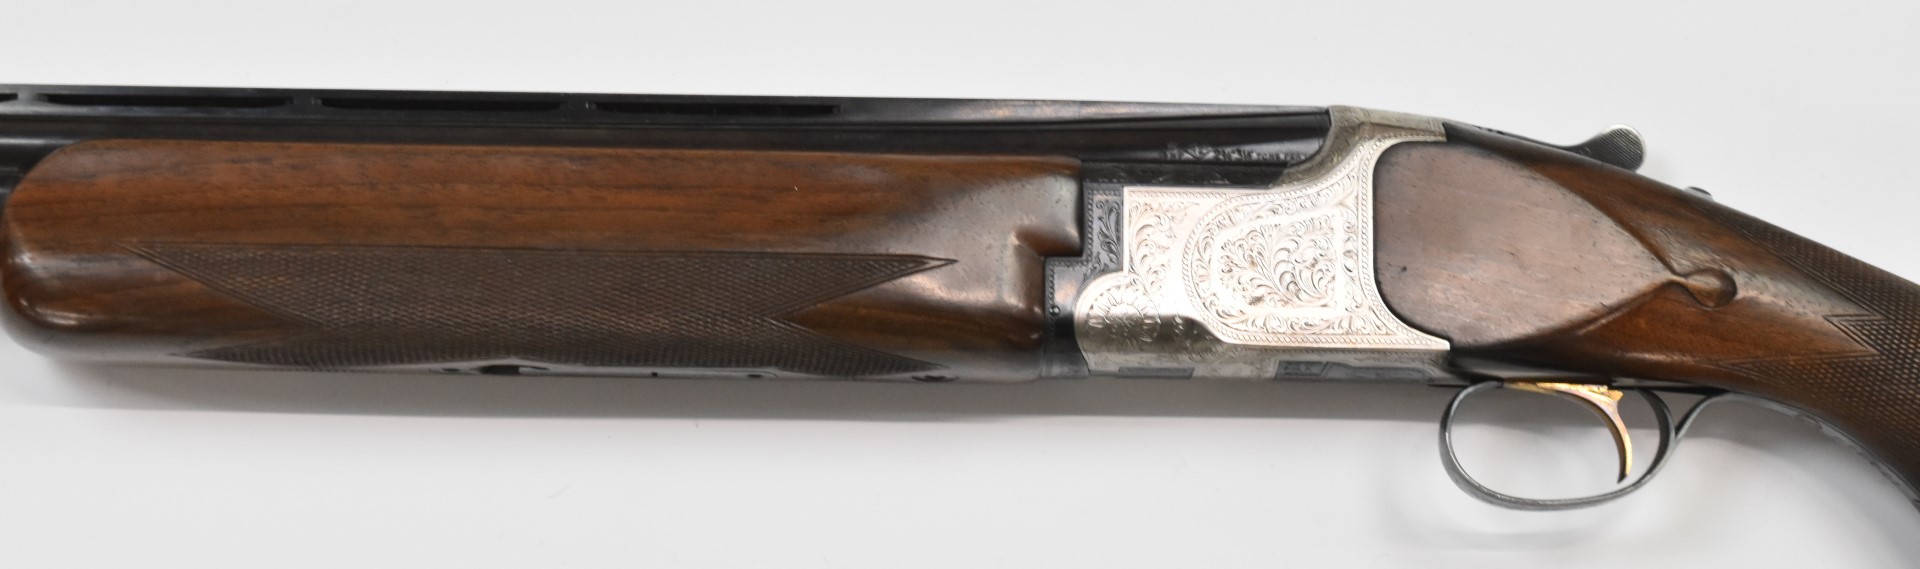 Miroku 12 bore over and under ejector shotgun with engraved locks, underside, trigger guard, top - Image 9 of 11